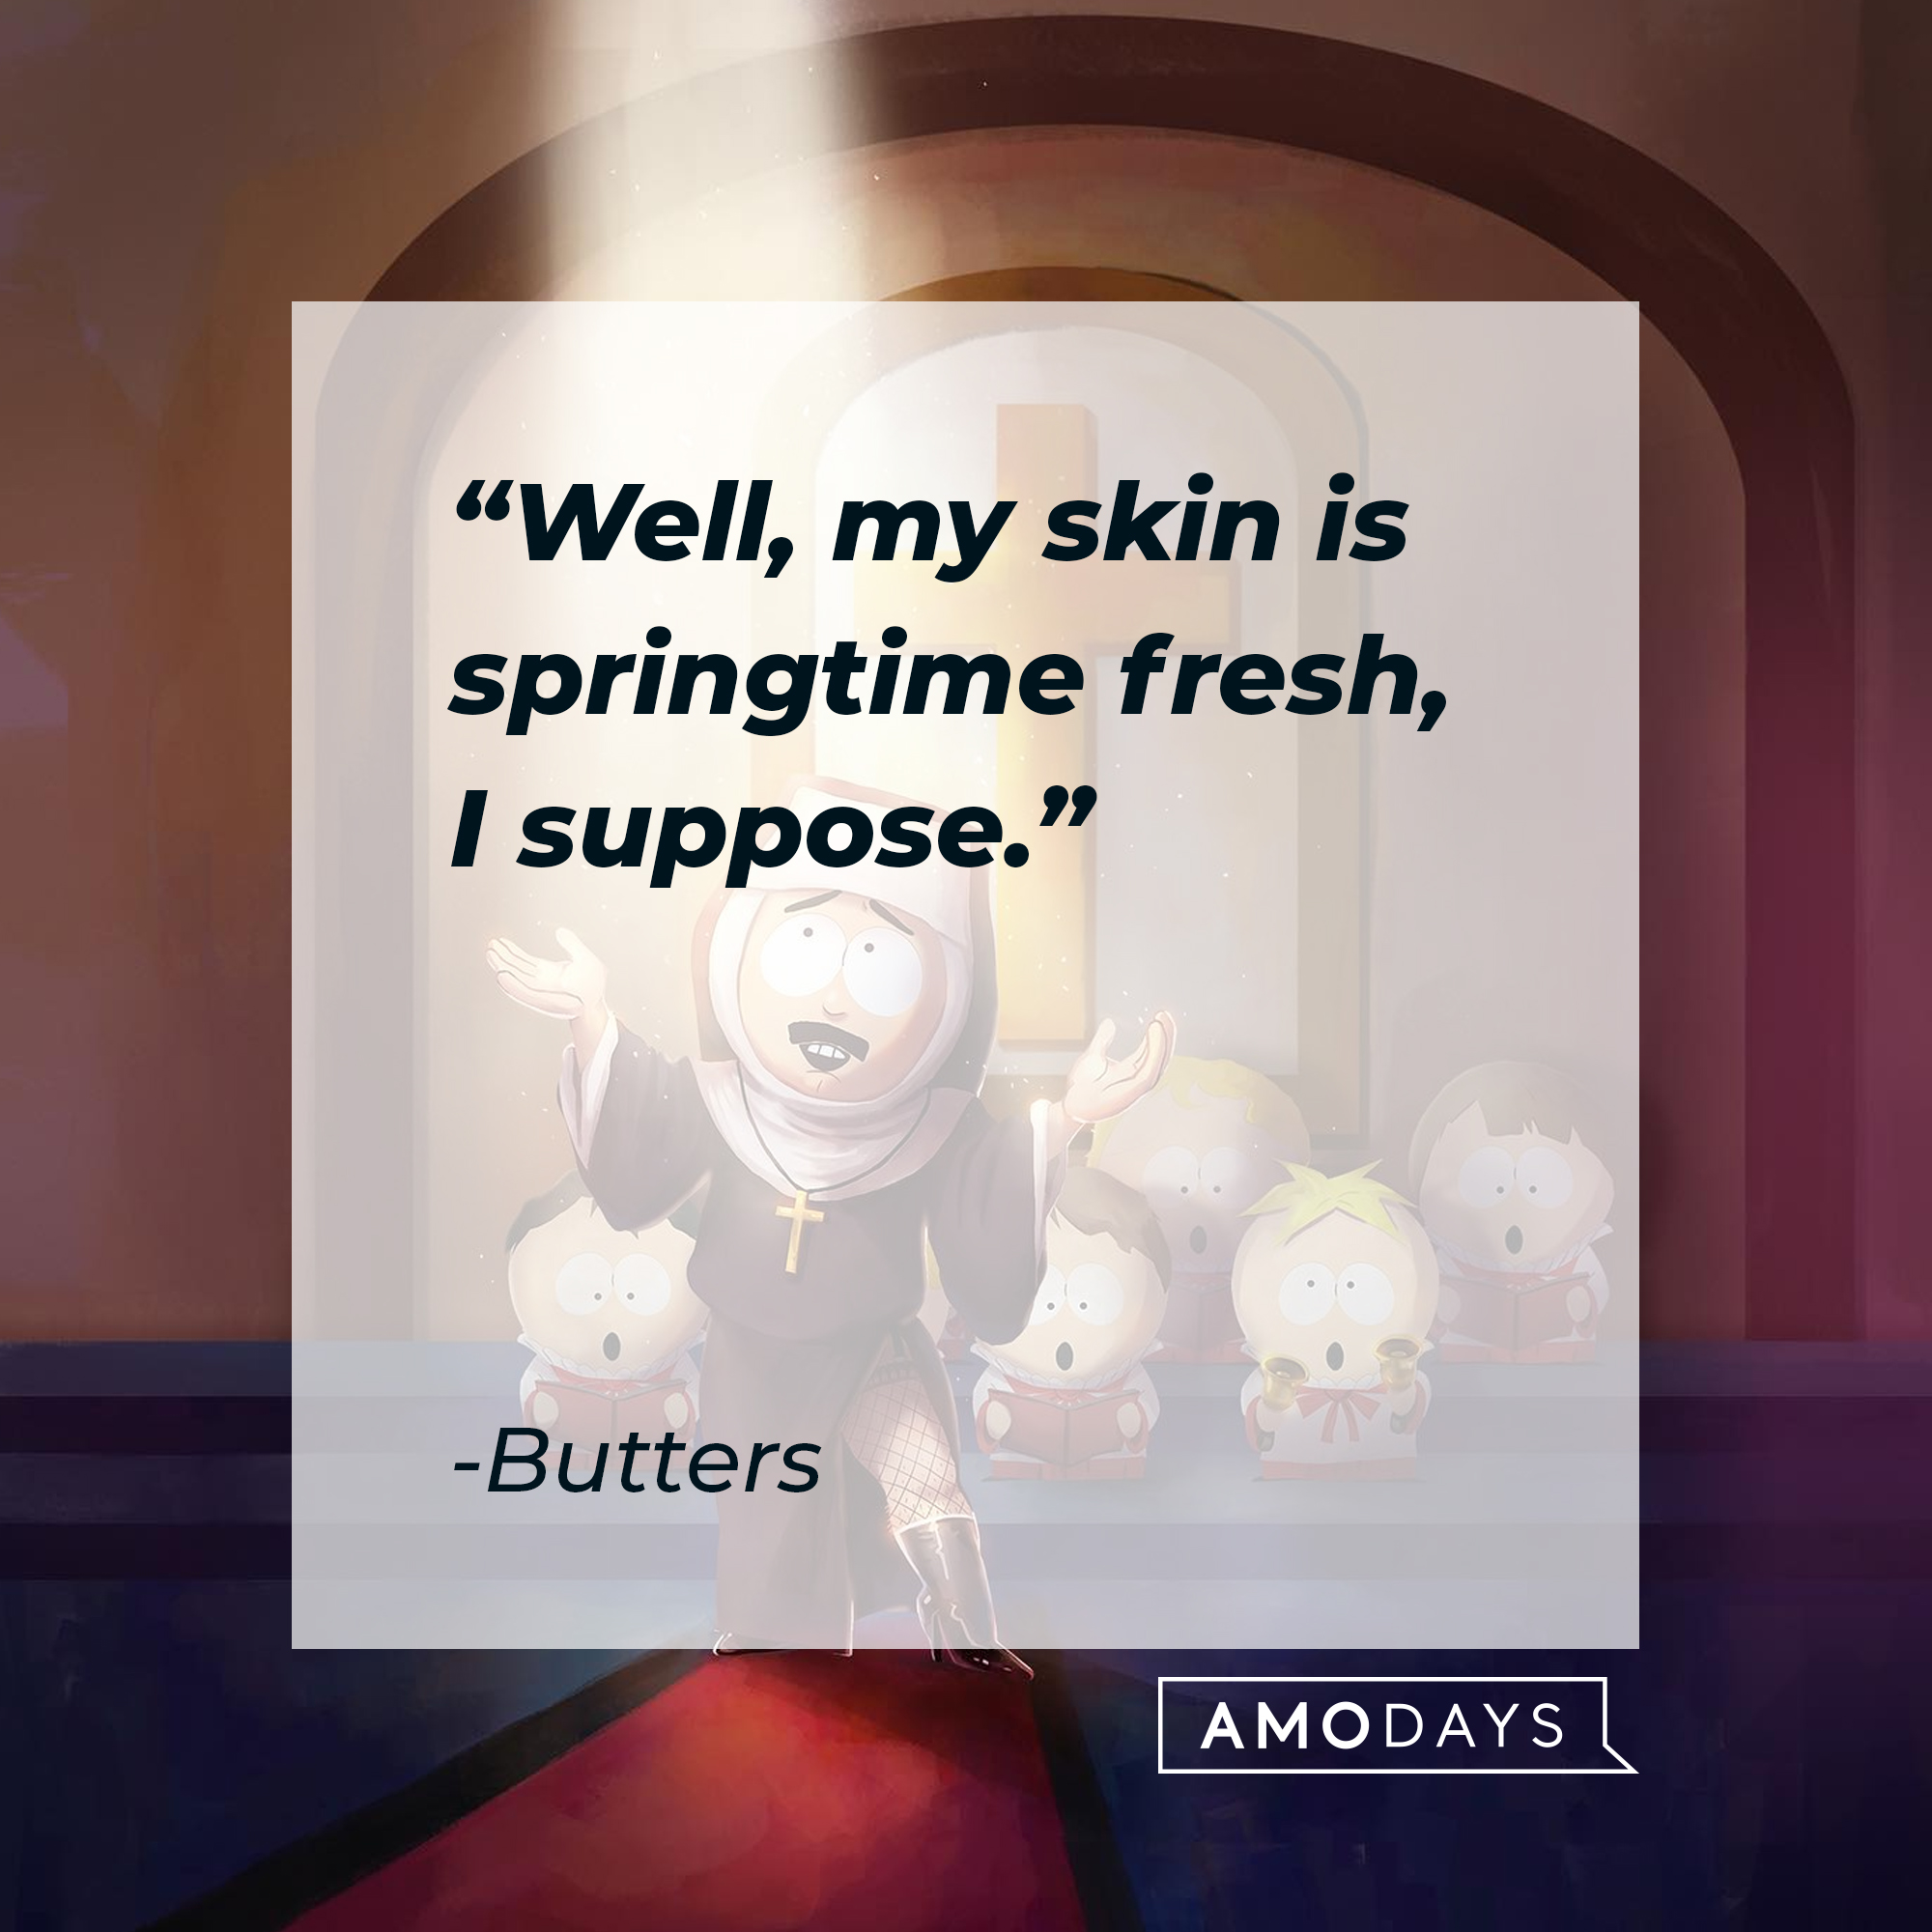 Butters' quote: "Well, my skin is springtime fresh, I suppose." | Source: facebook.com/southpark